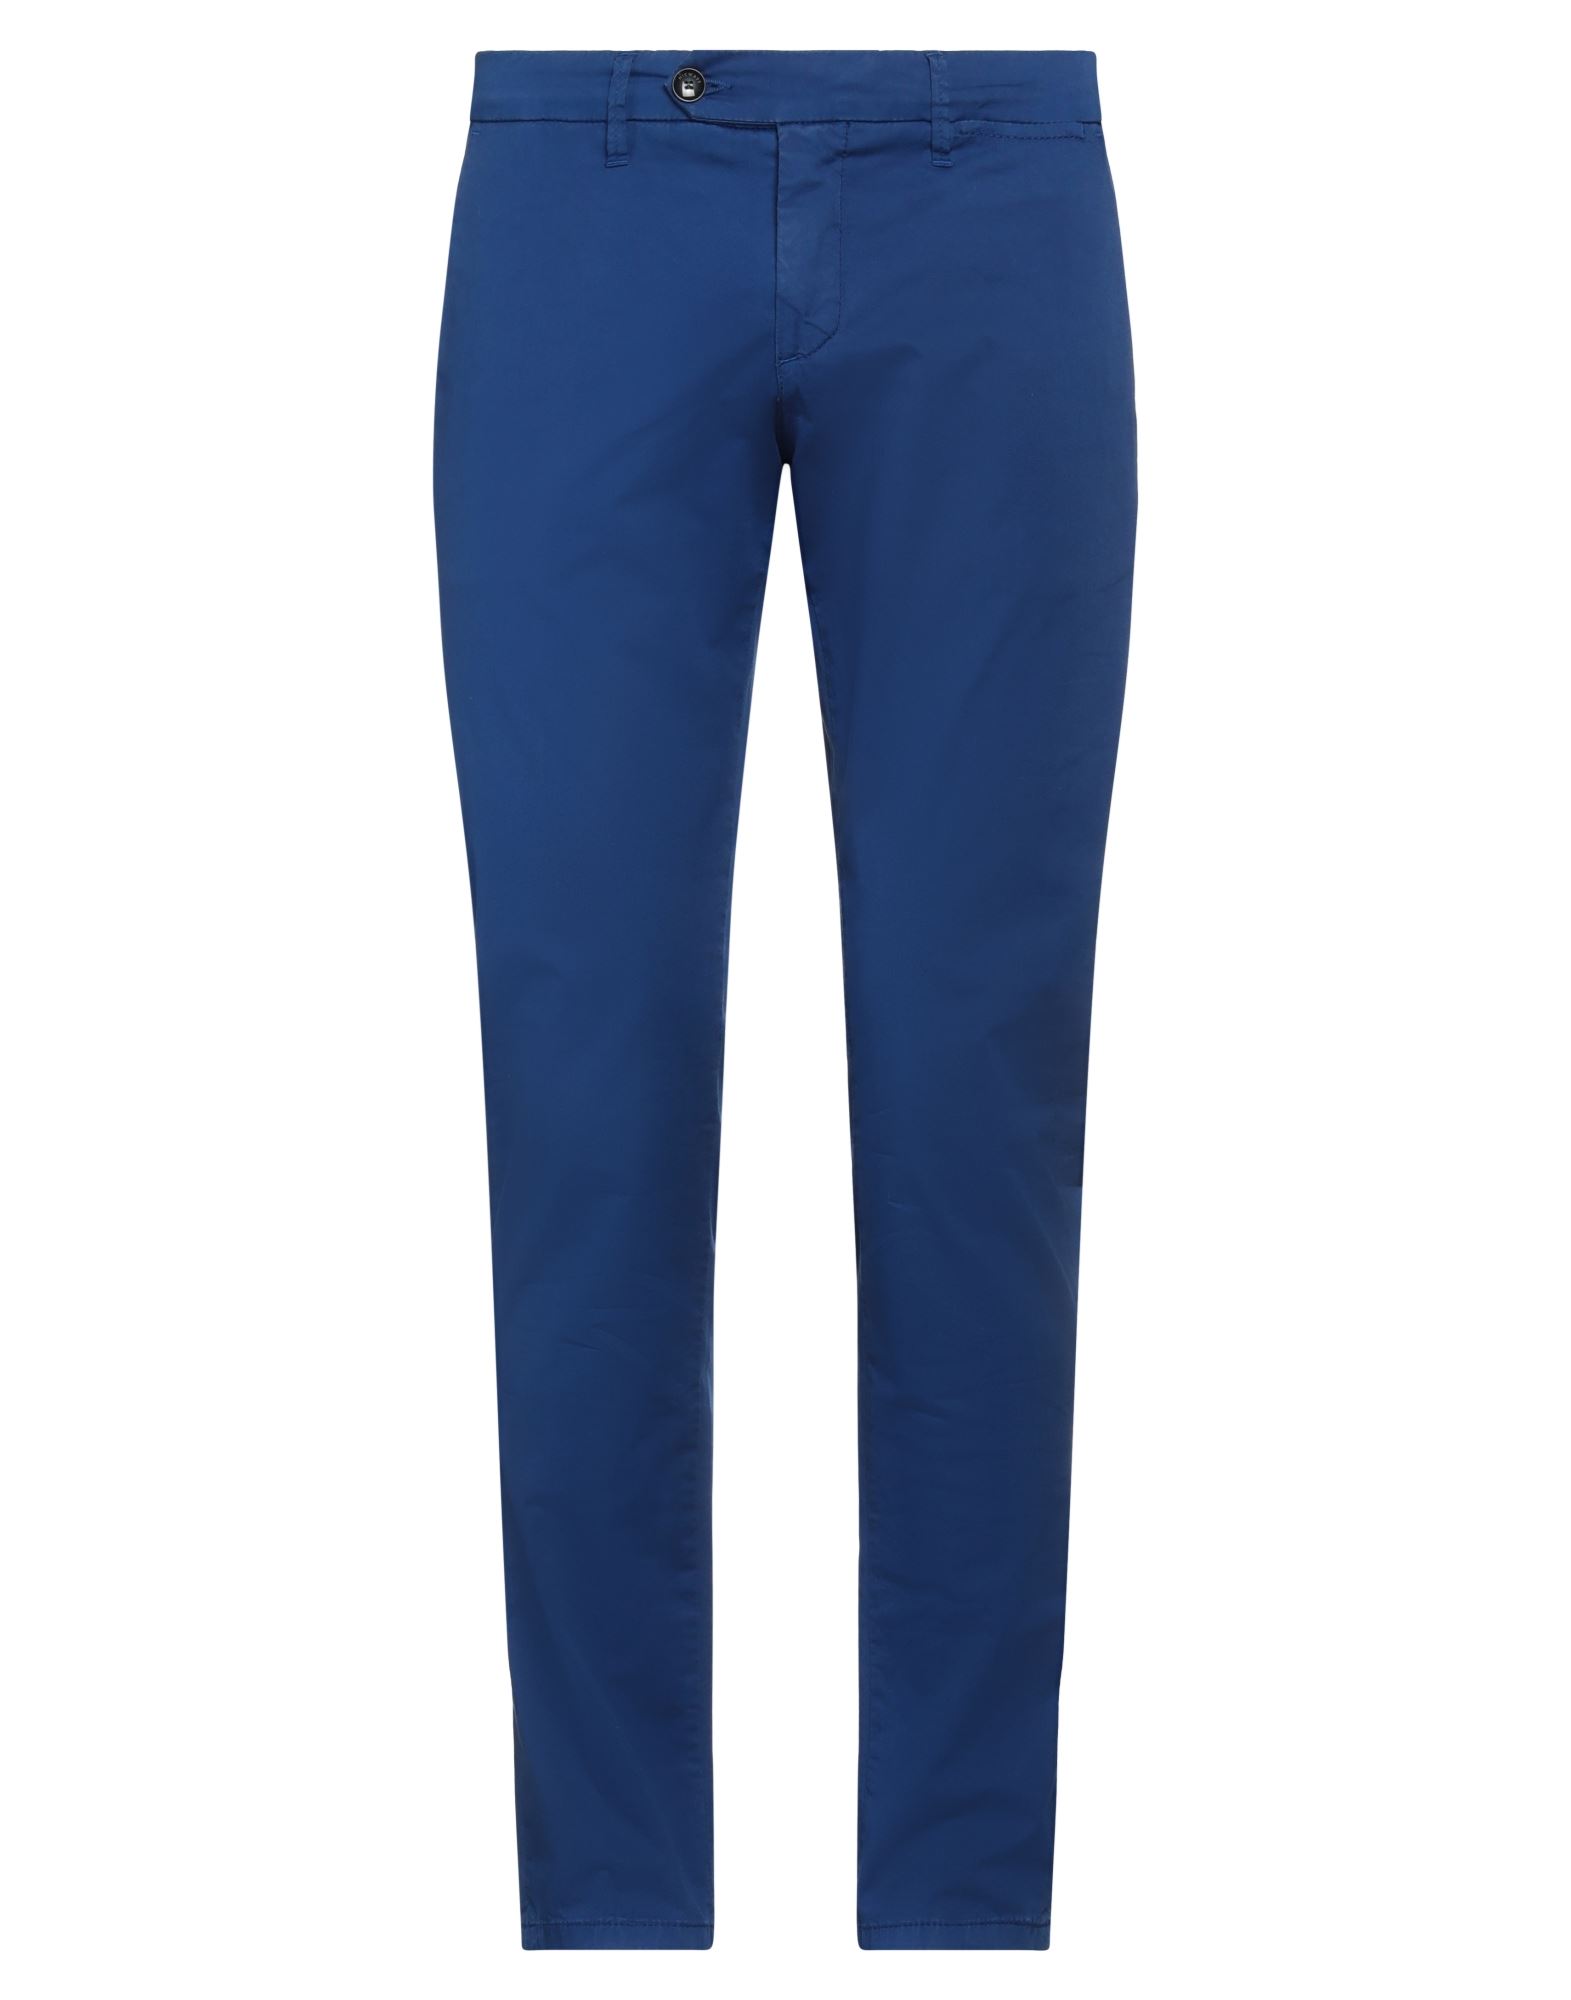 Nicwave Pants In Bright Blue